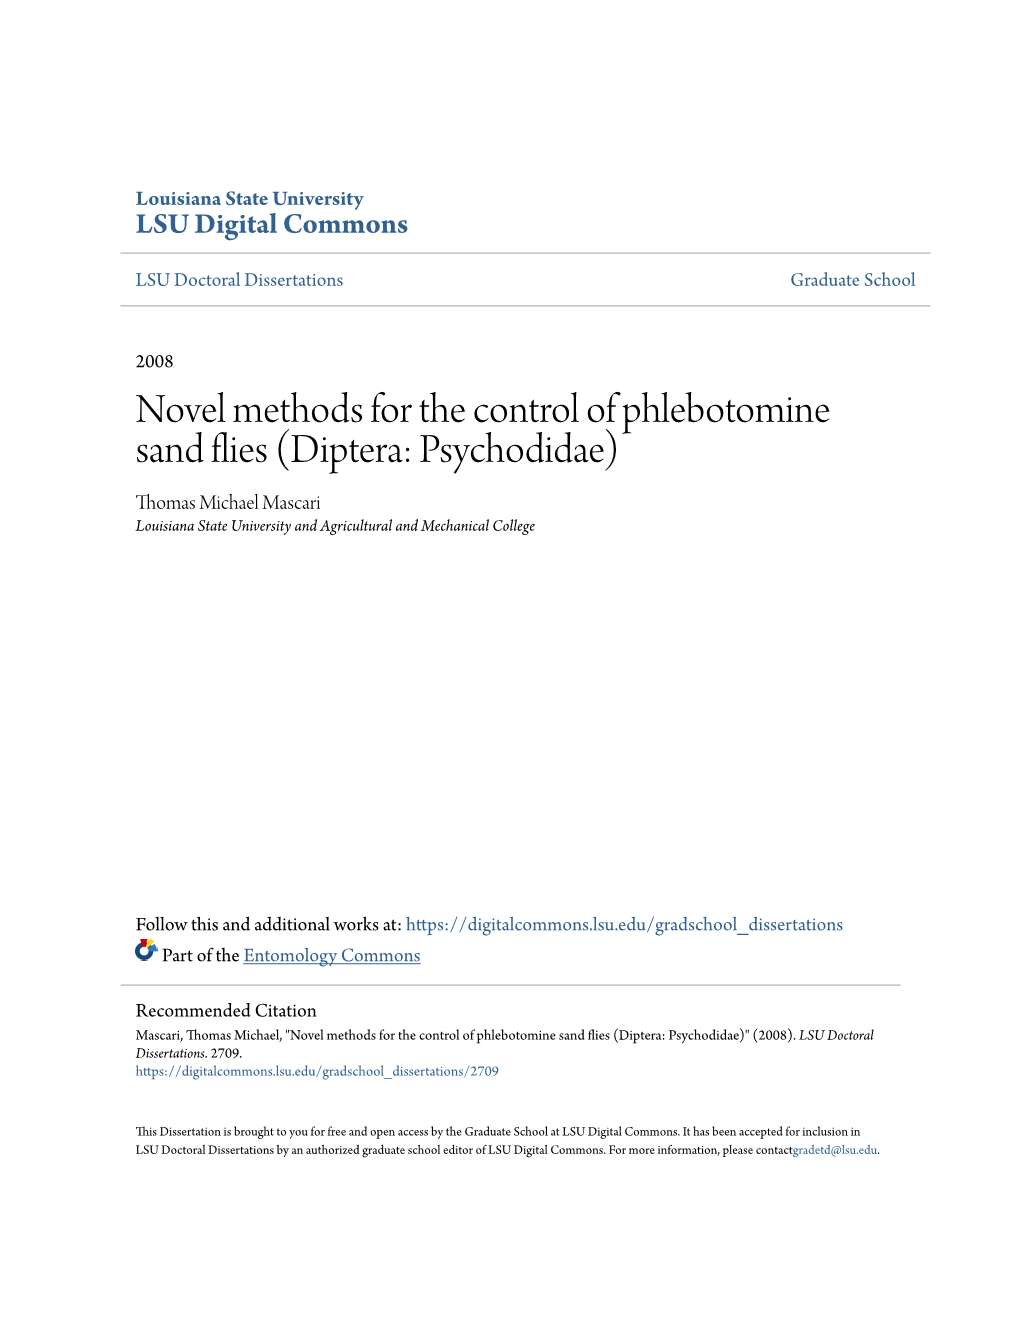 Novel Methods for the Control of Phlebotomine Sand Flies (Diptera: Psychodidae)" (2008)